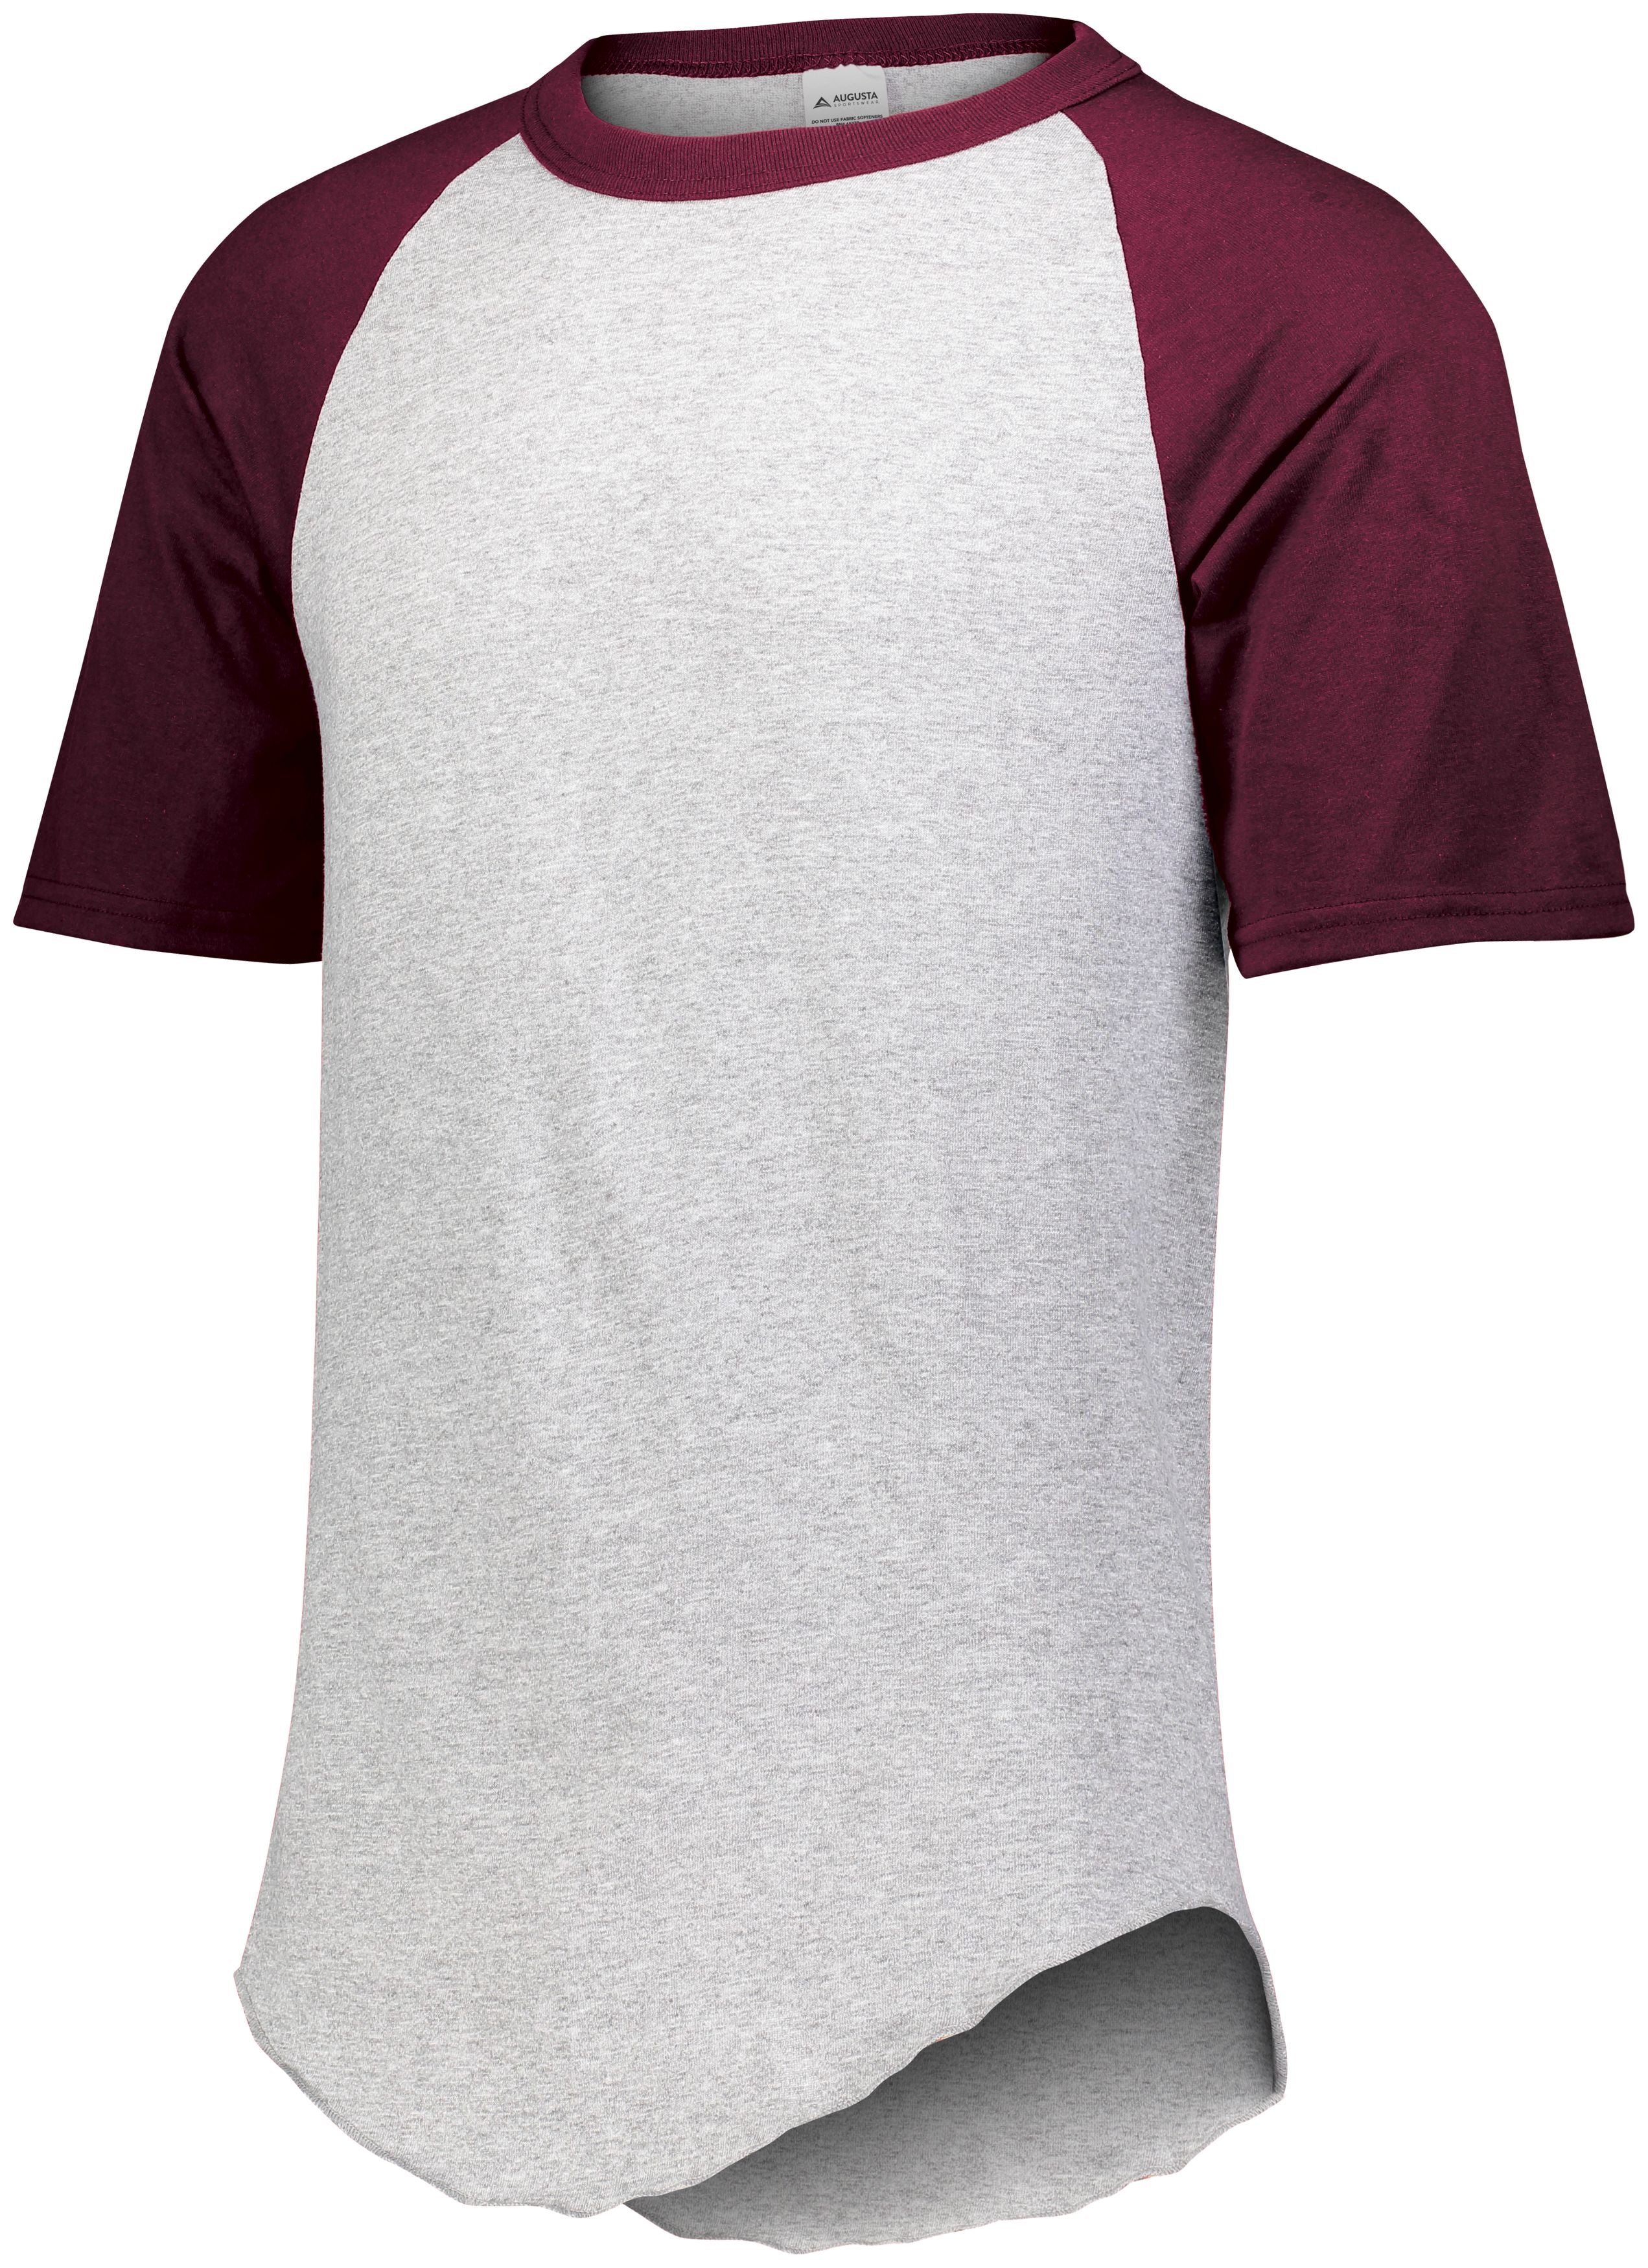 Augusta Sportswear Short Sleeve Baseball Jersey in Athletic Heather/Maroon  -Part of the Adult, Adult-Jersey, Augusta-Products, Baseball, Shirts, All-Sports, All-Sports-1 product lines at KanaleyCreations.com